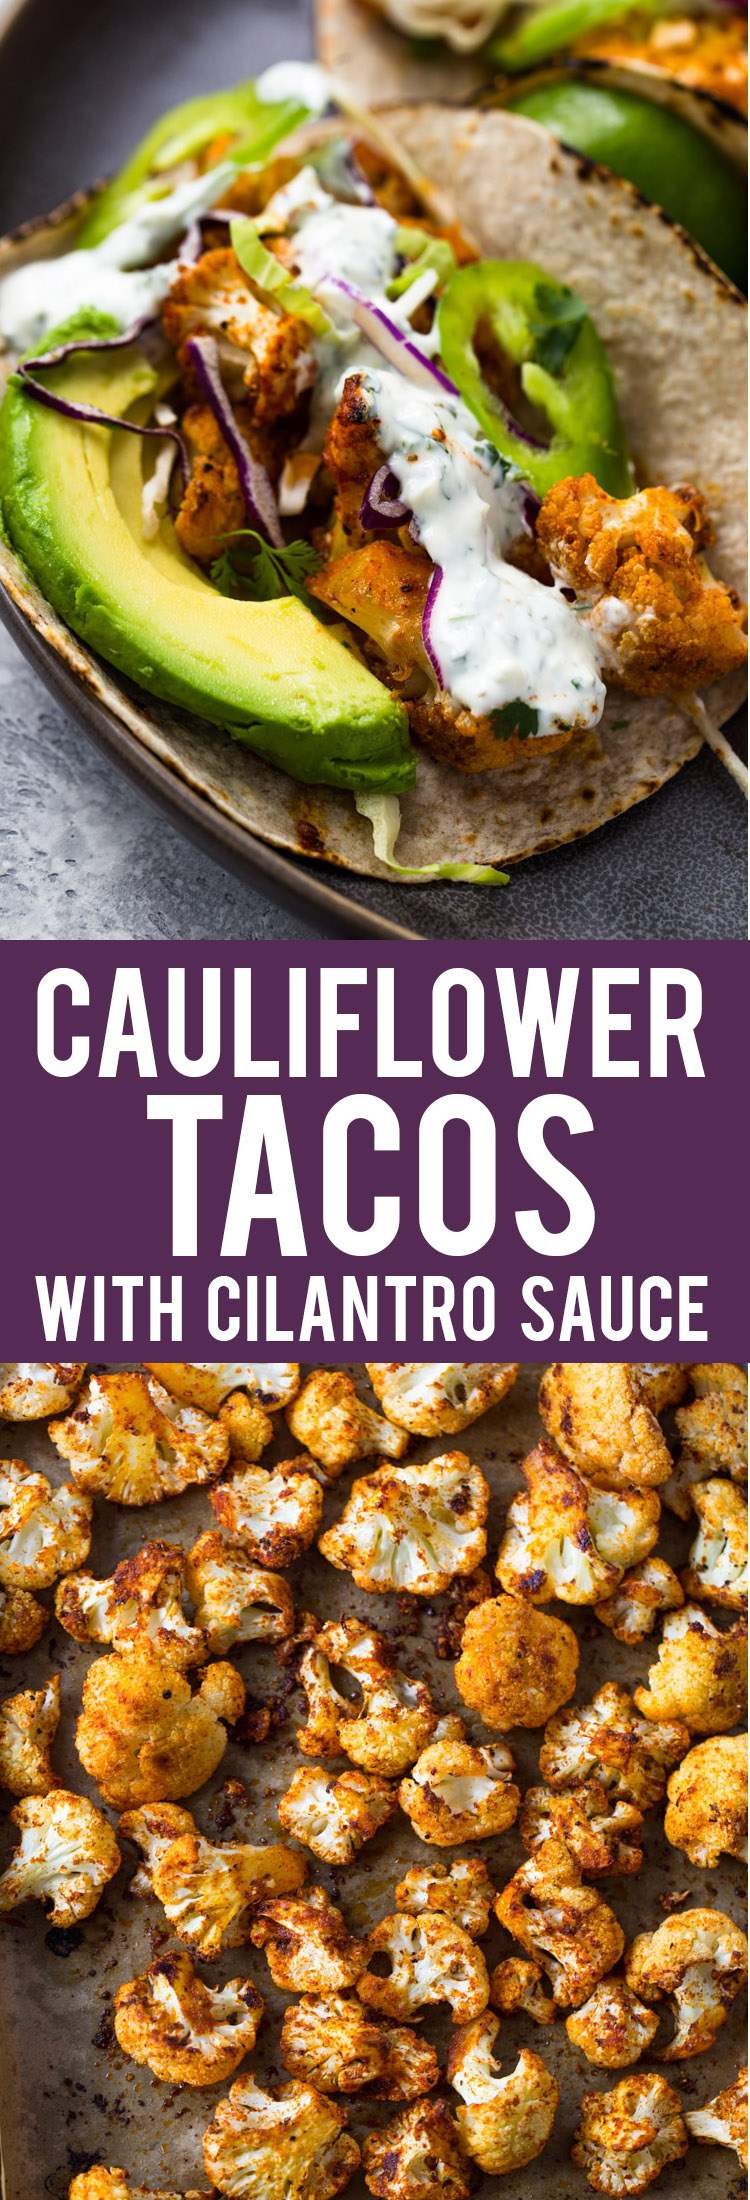 Spicy Baked Cauliflower Tacos with Cilantro Sauce